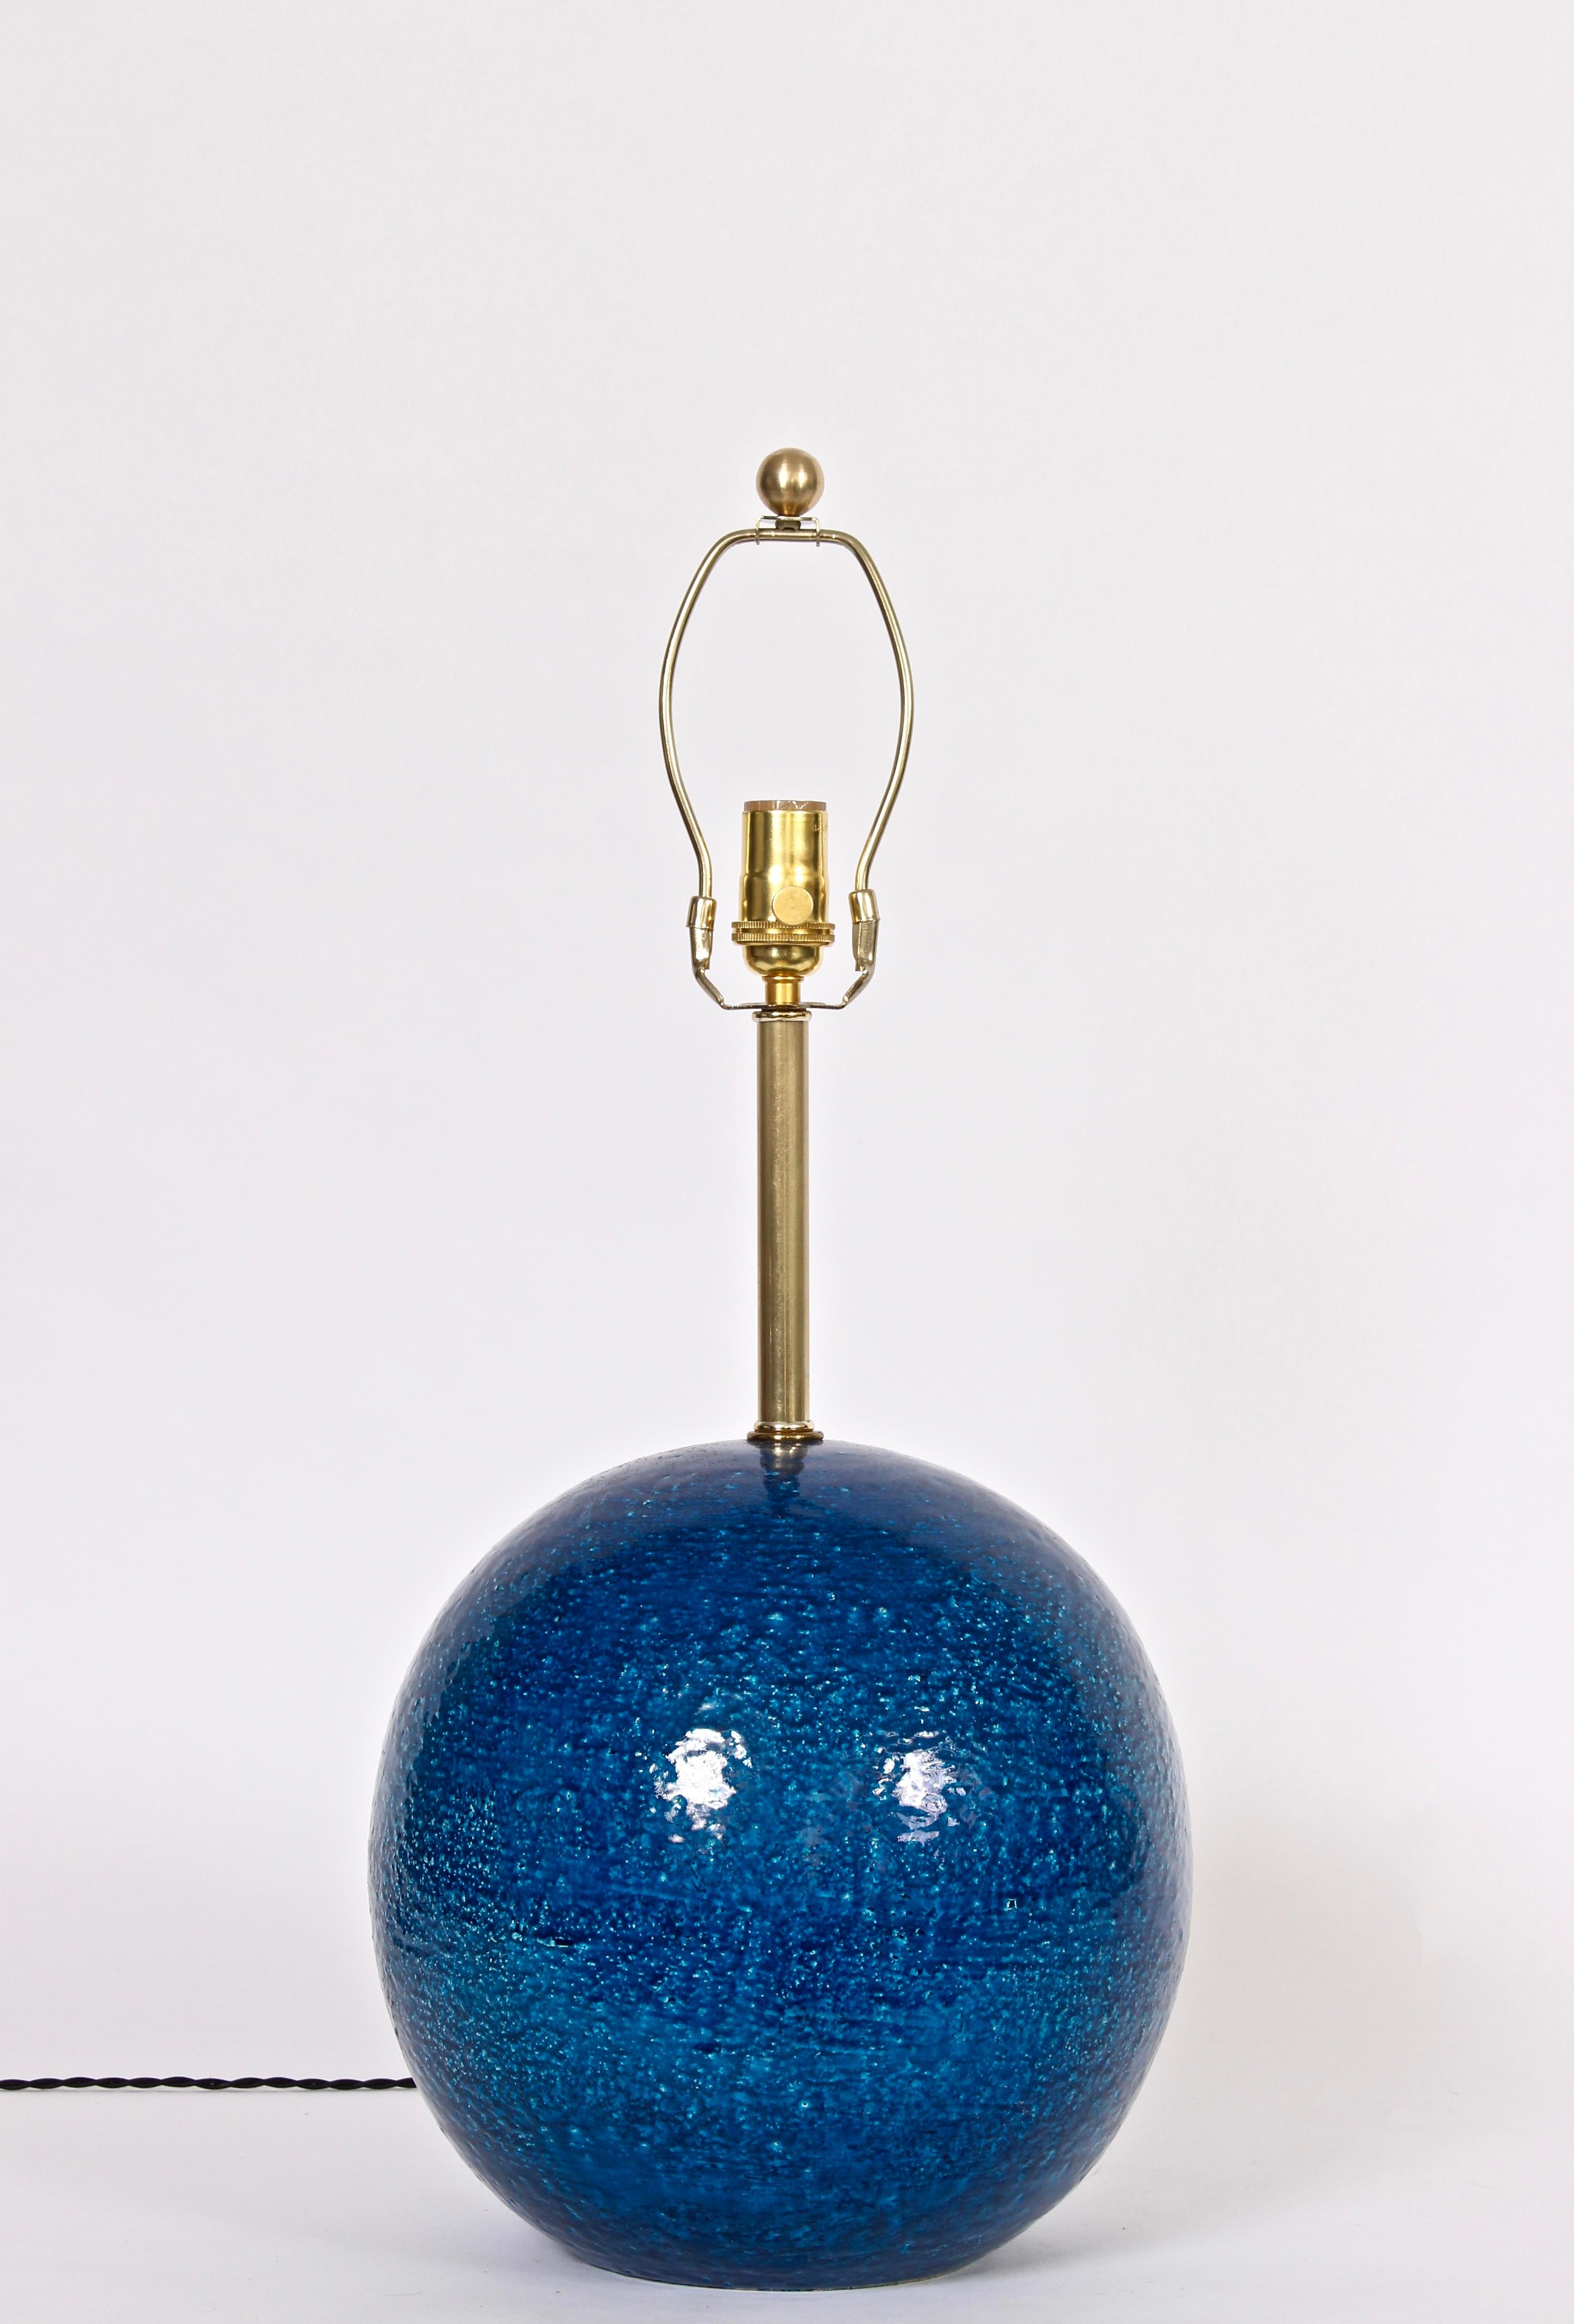 Italian Modern Aldo Londi for Bitossi cobalt blue textured globe table lamp. Featuring a handcrafted coarse ball form with brilliant Royal blue coloration and reflective glaze. Distributed by Raymor. Lampshade shown for display only and not for sale